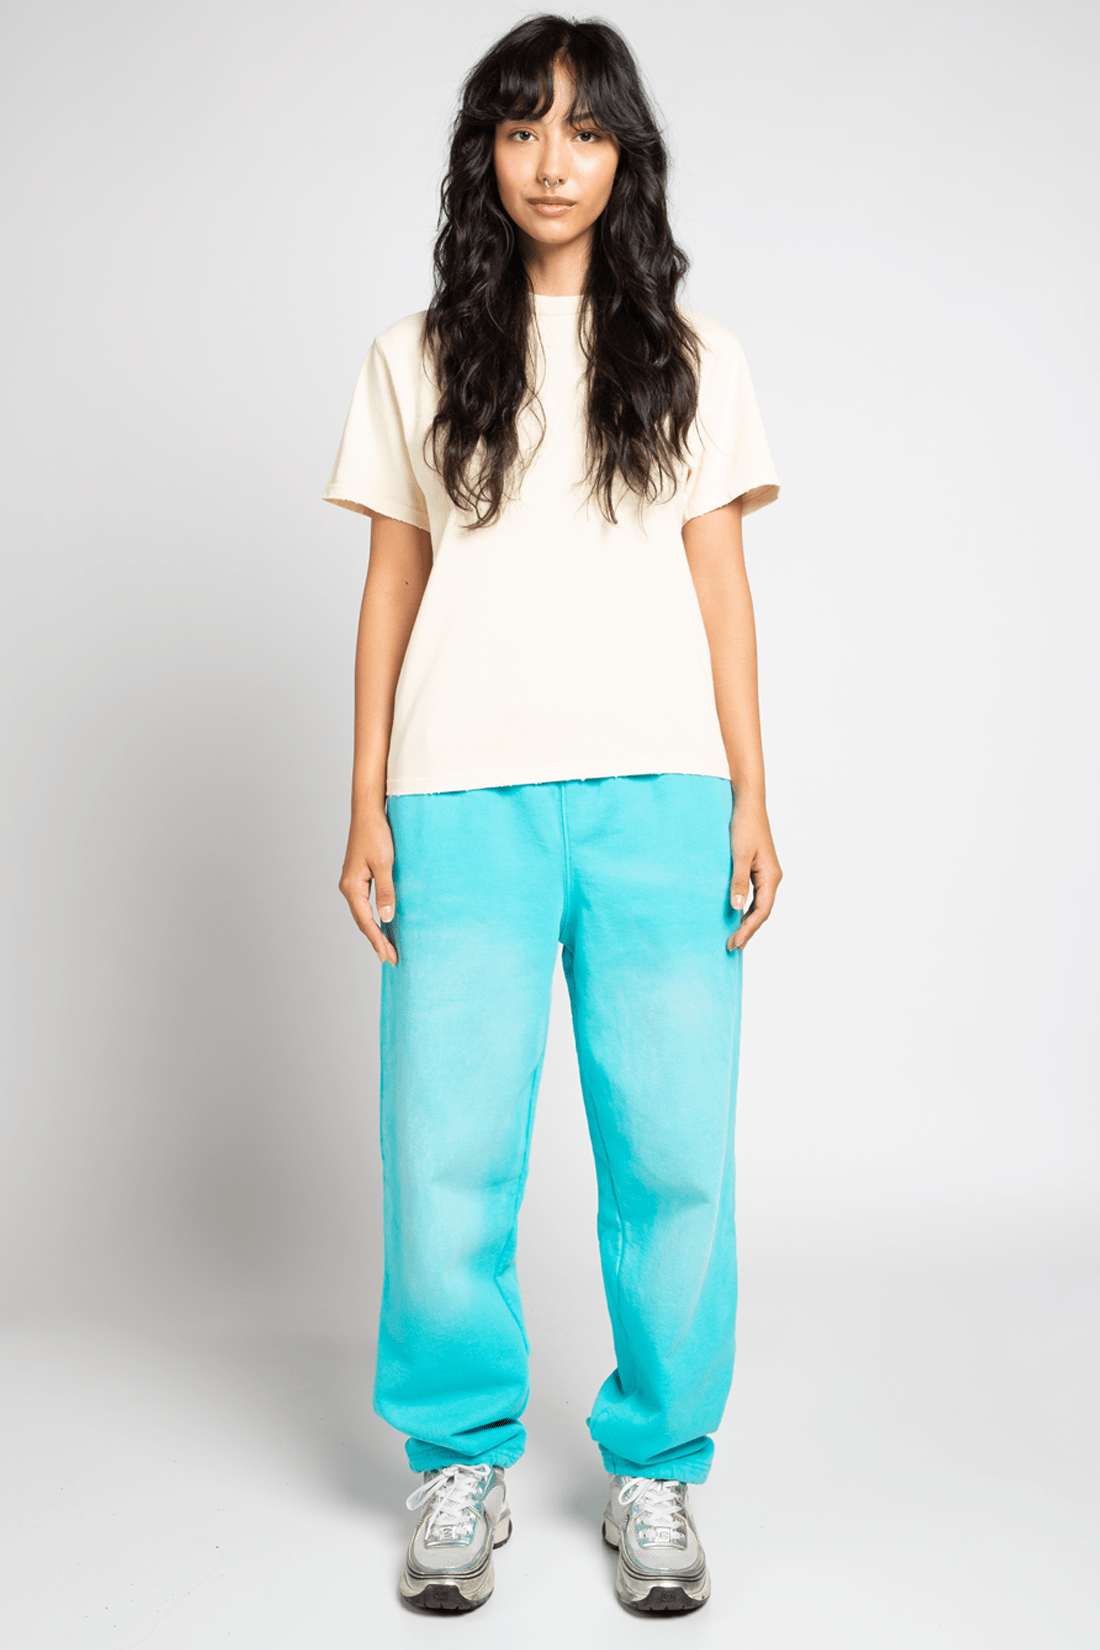 Exclusive Recess Sweatpants - Faded Offshore Blue – MADE